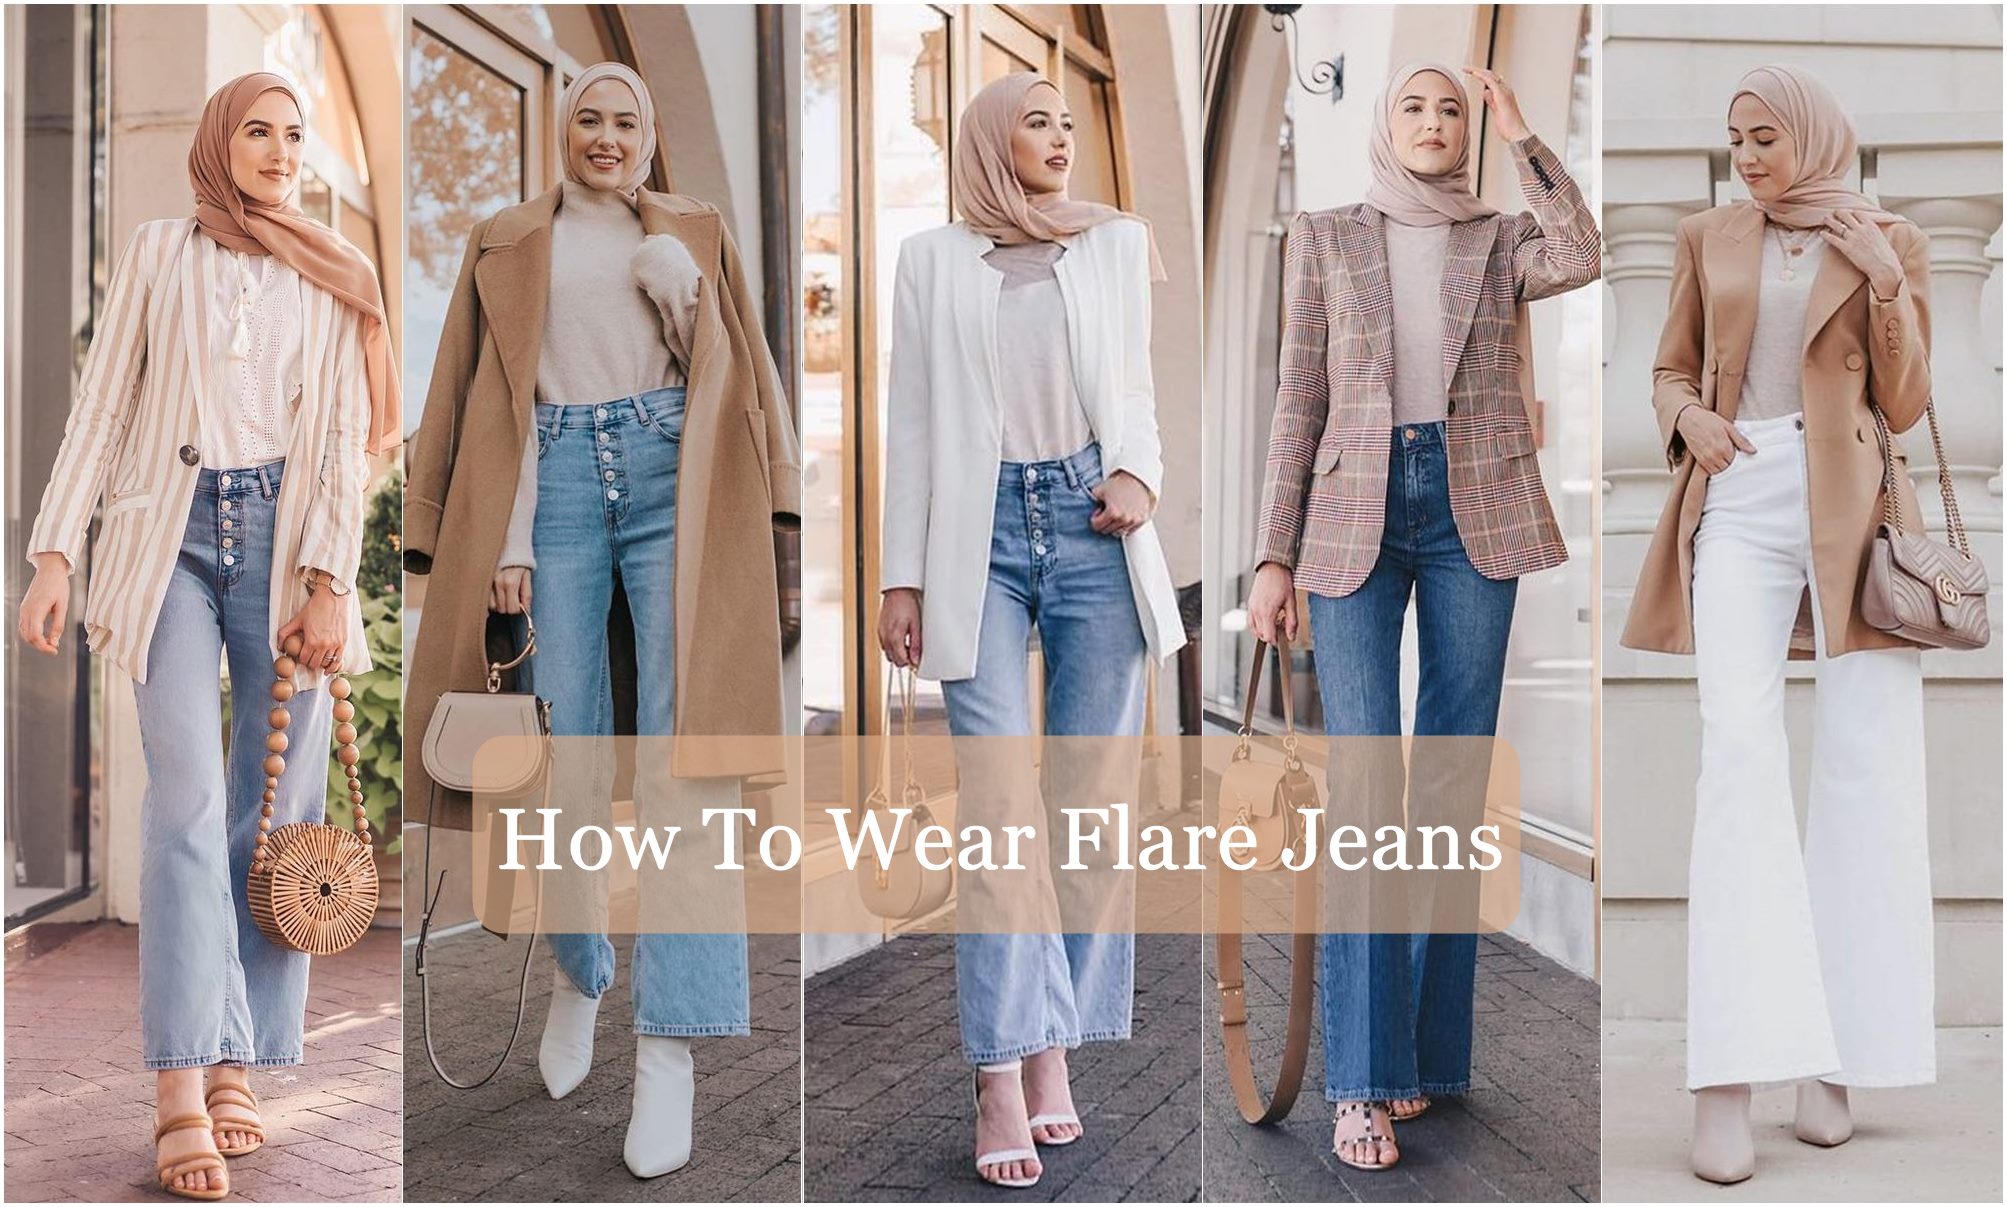 How to Wear Flare Jeans